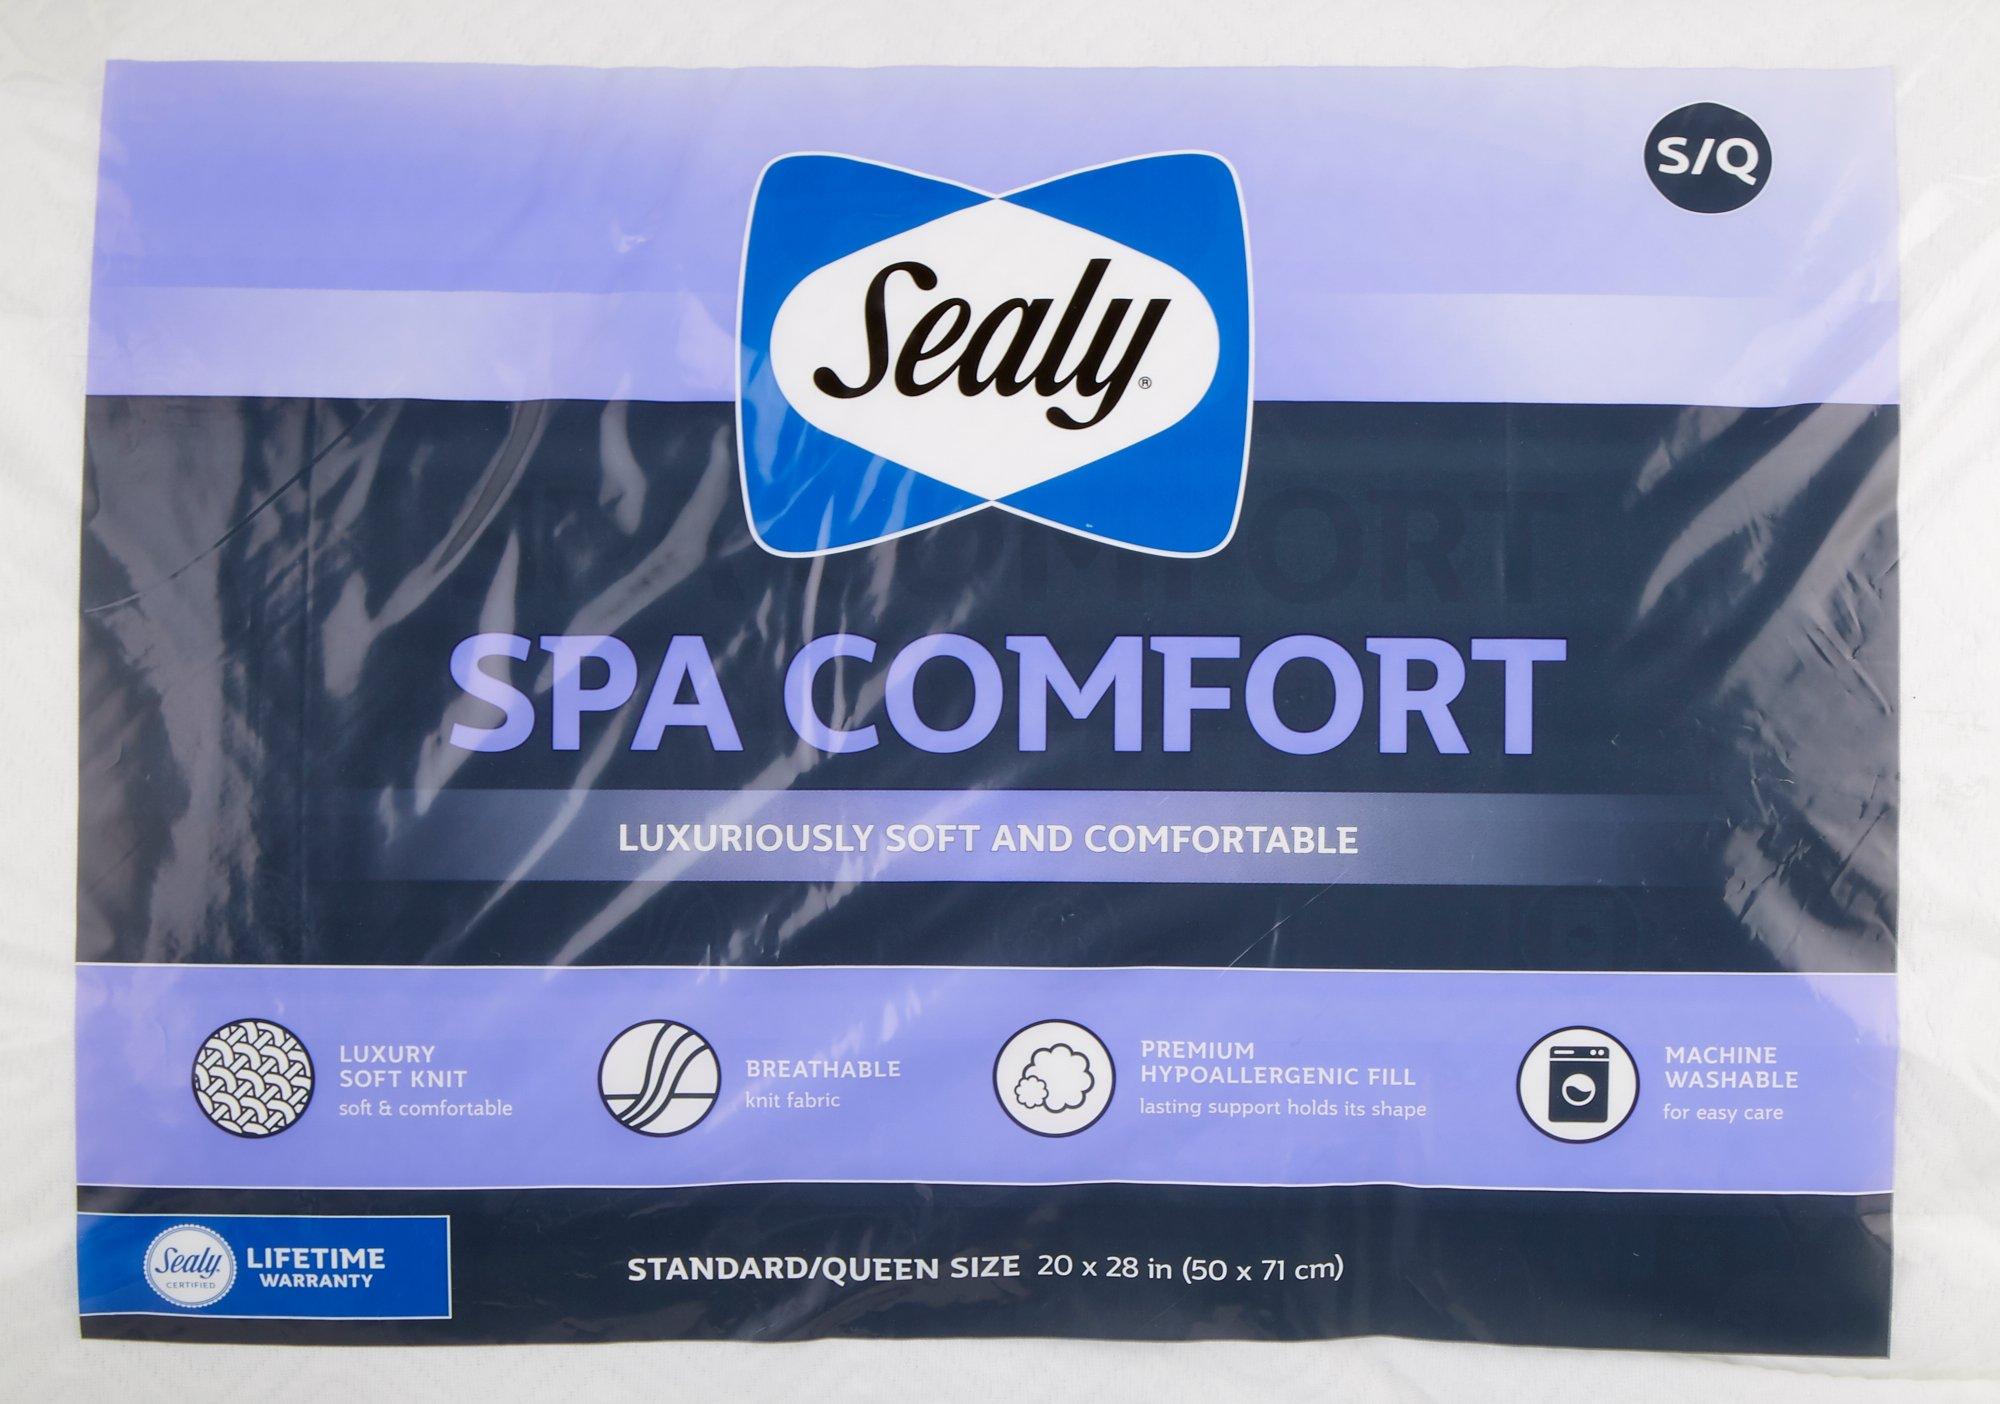 Sealy Spa Comfort Bed Pillow